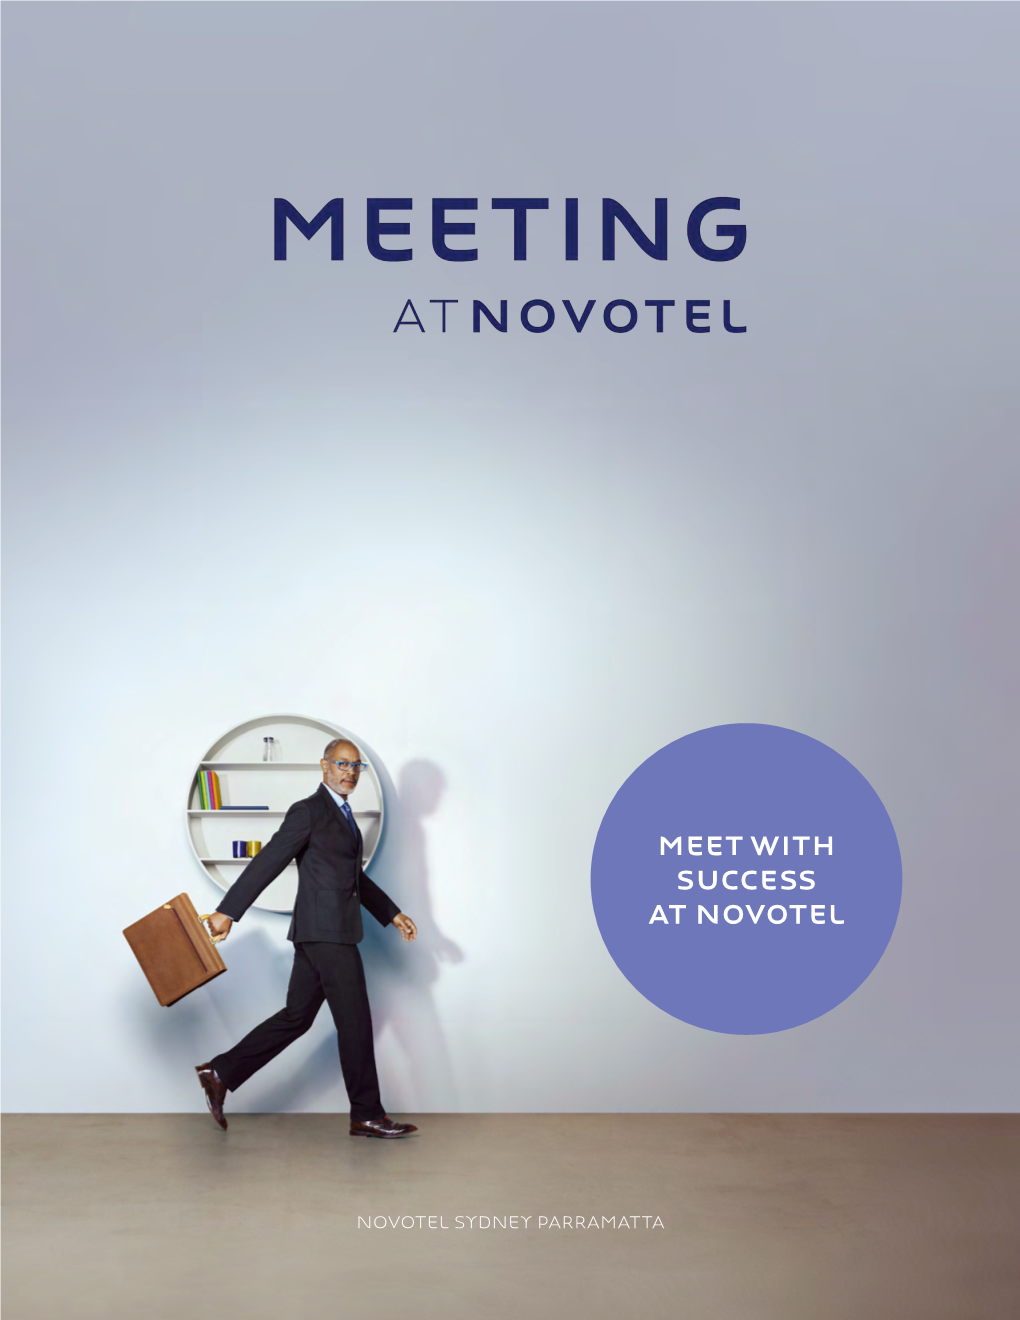 Meet with Success at NOVOTEL Meet with Success